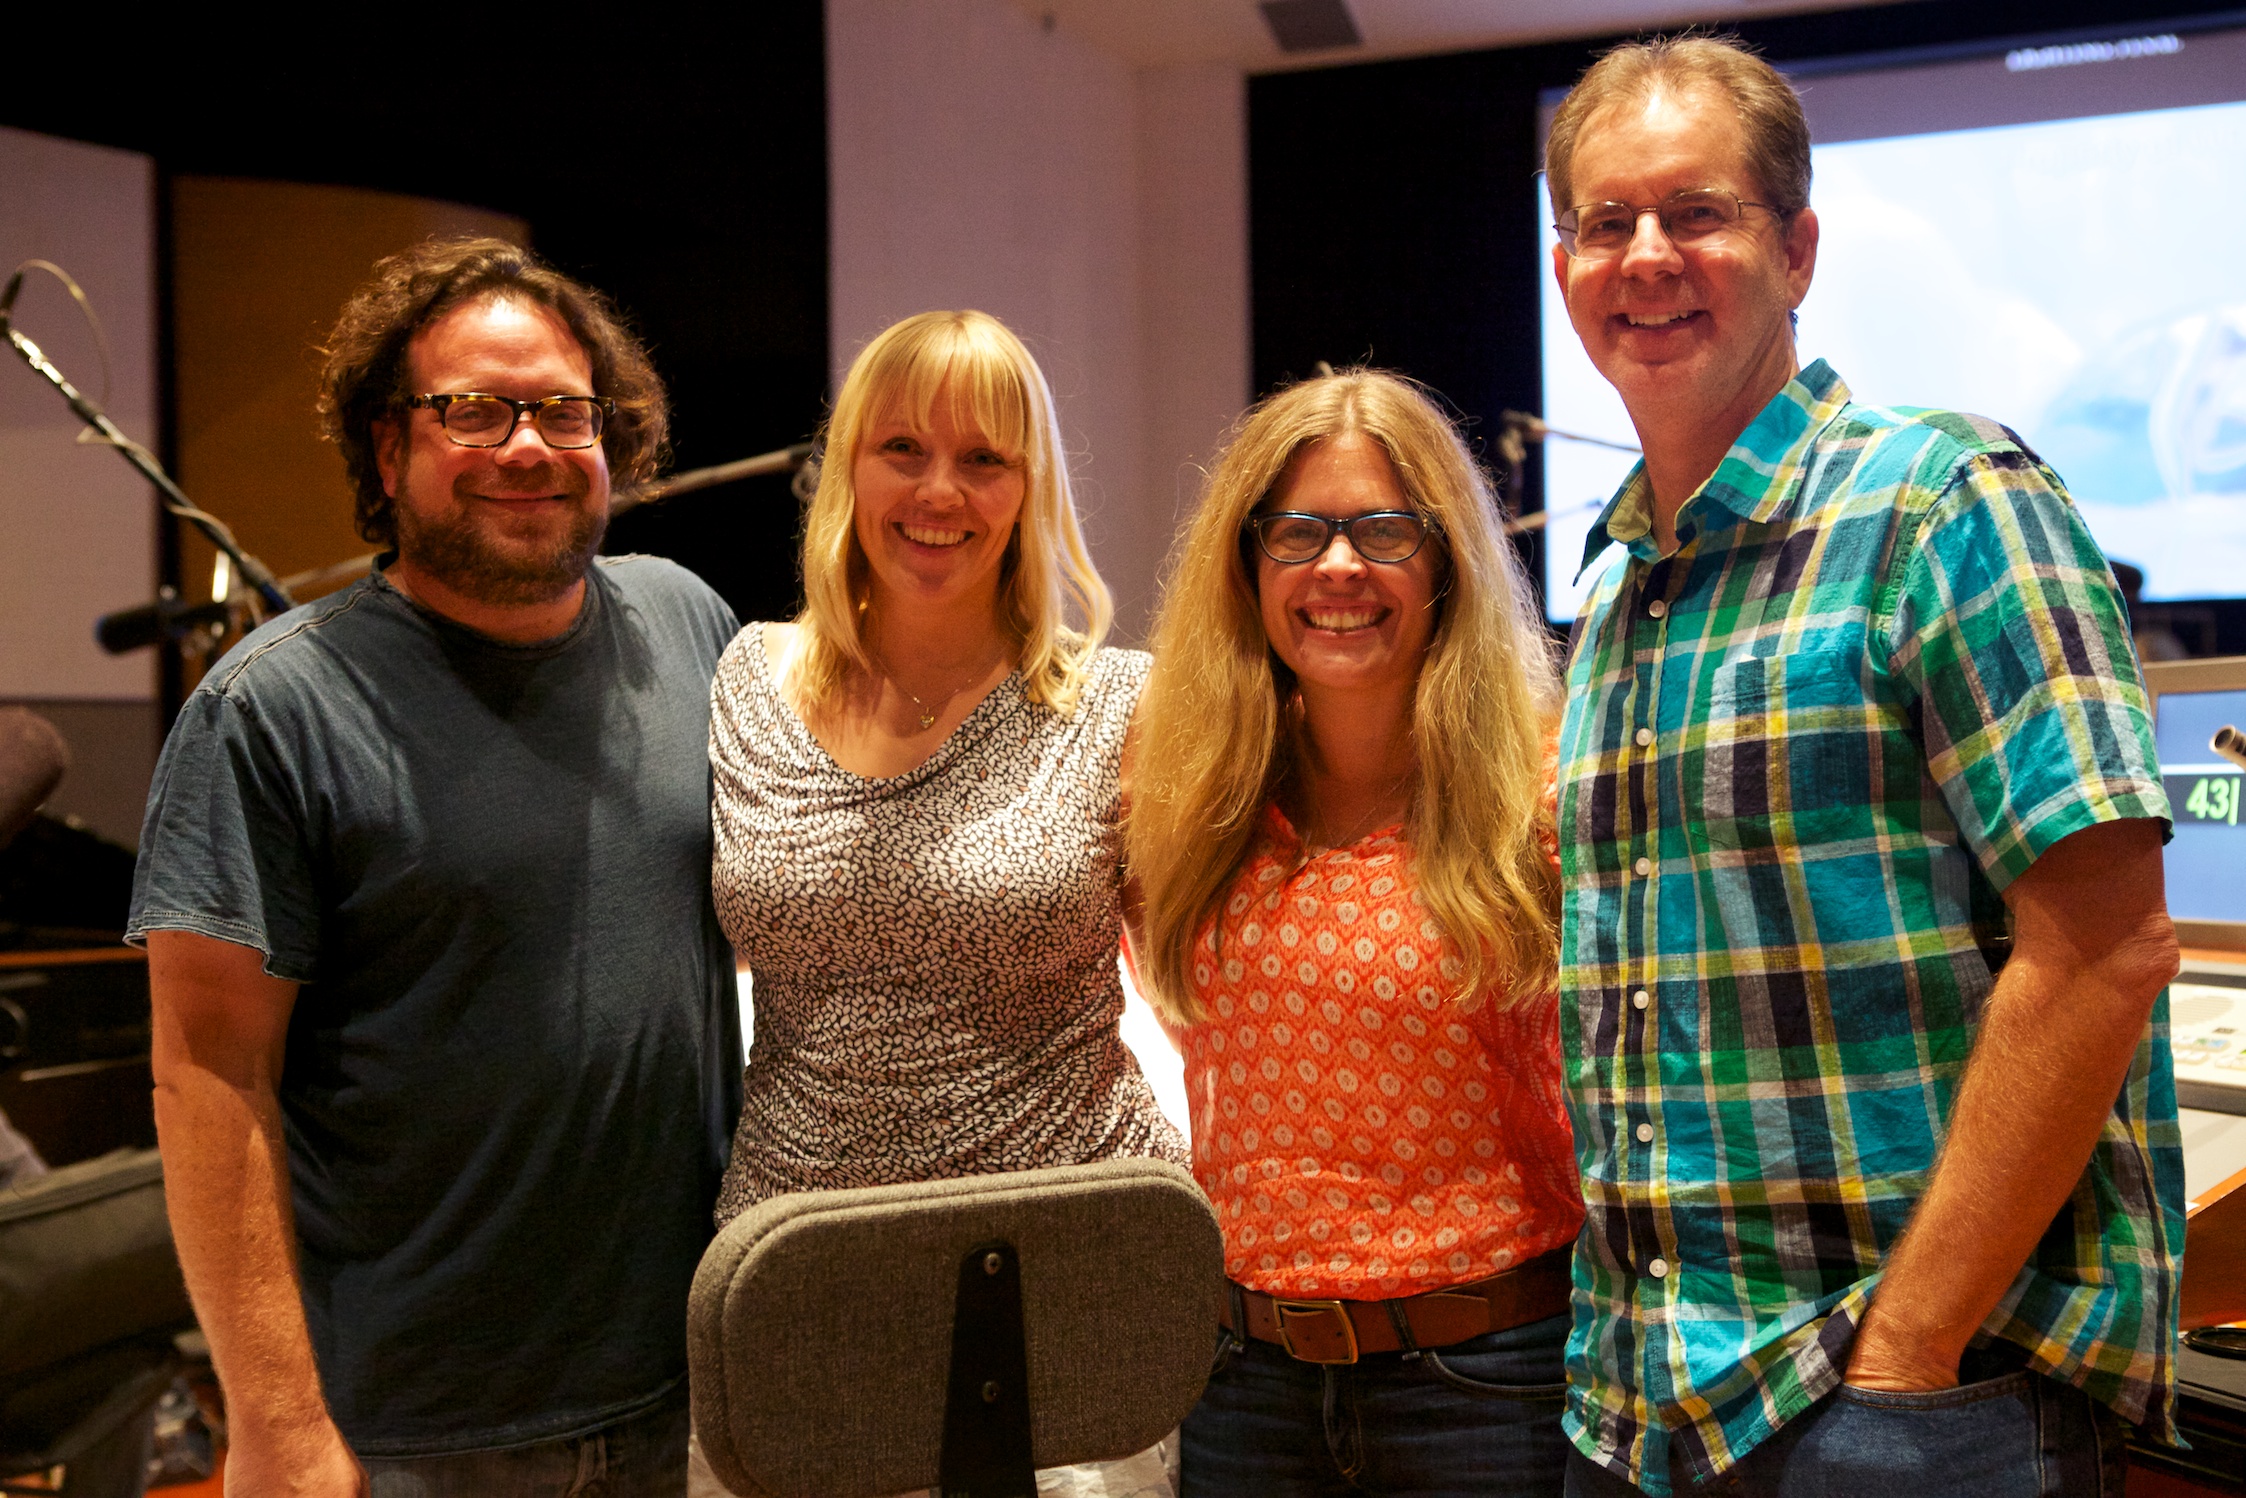 Christine Hals with Frozen composer Christophe Beck and Frozen directors Jennifer Lee and Chris Buck at Warner Bros scoring stage. Recording orchestra for Frozen.